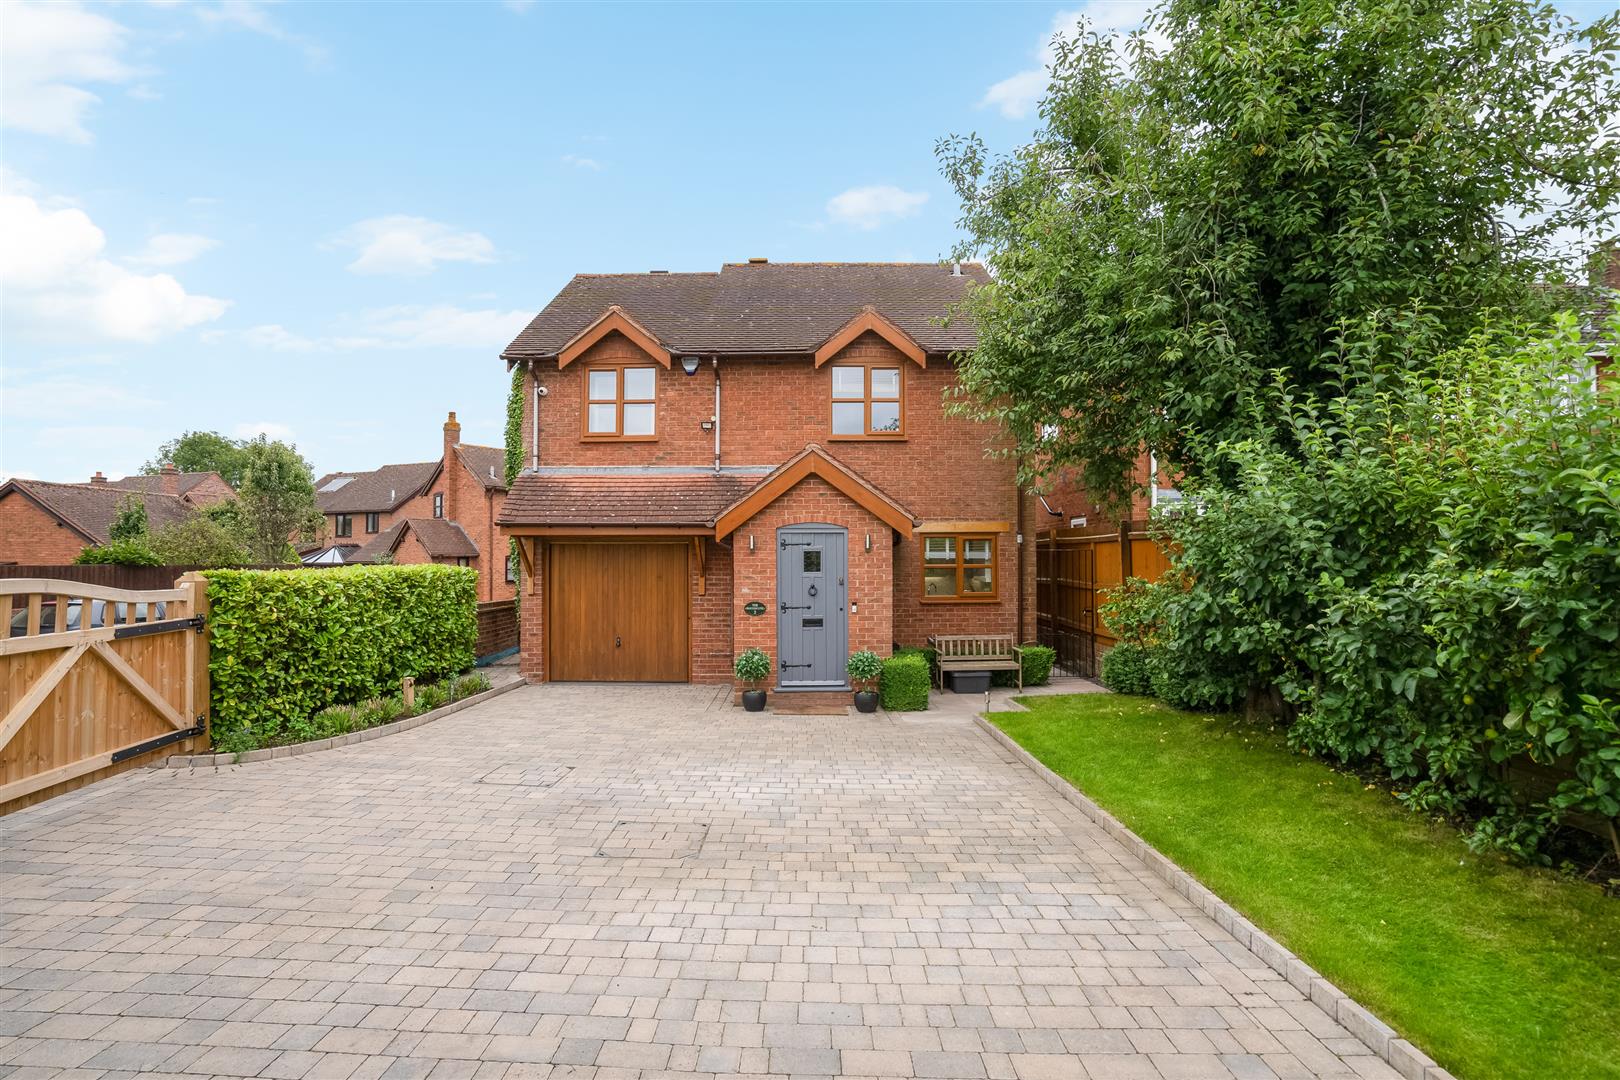 3 bed detached house for sale in Bakehouse Lane, Chadwick End  - Property Image 1